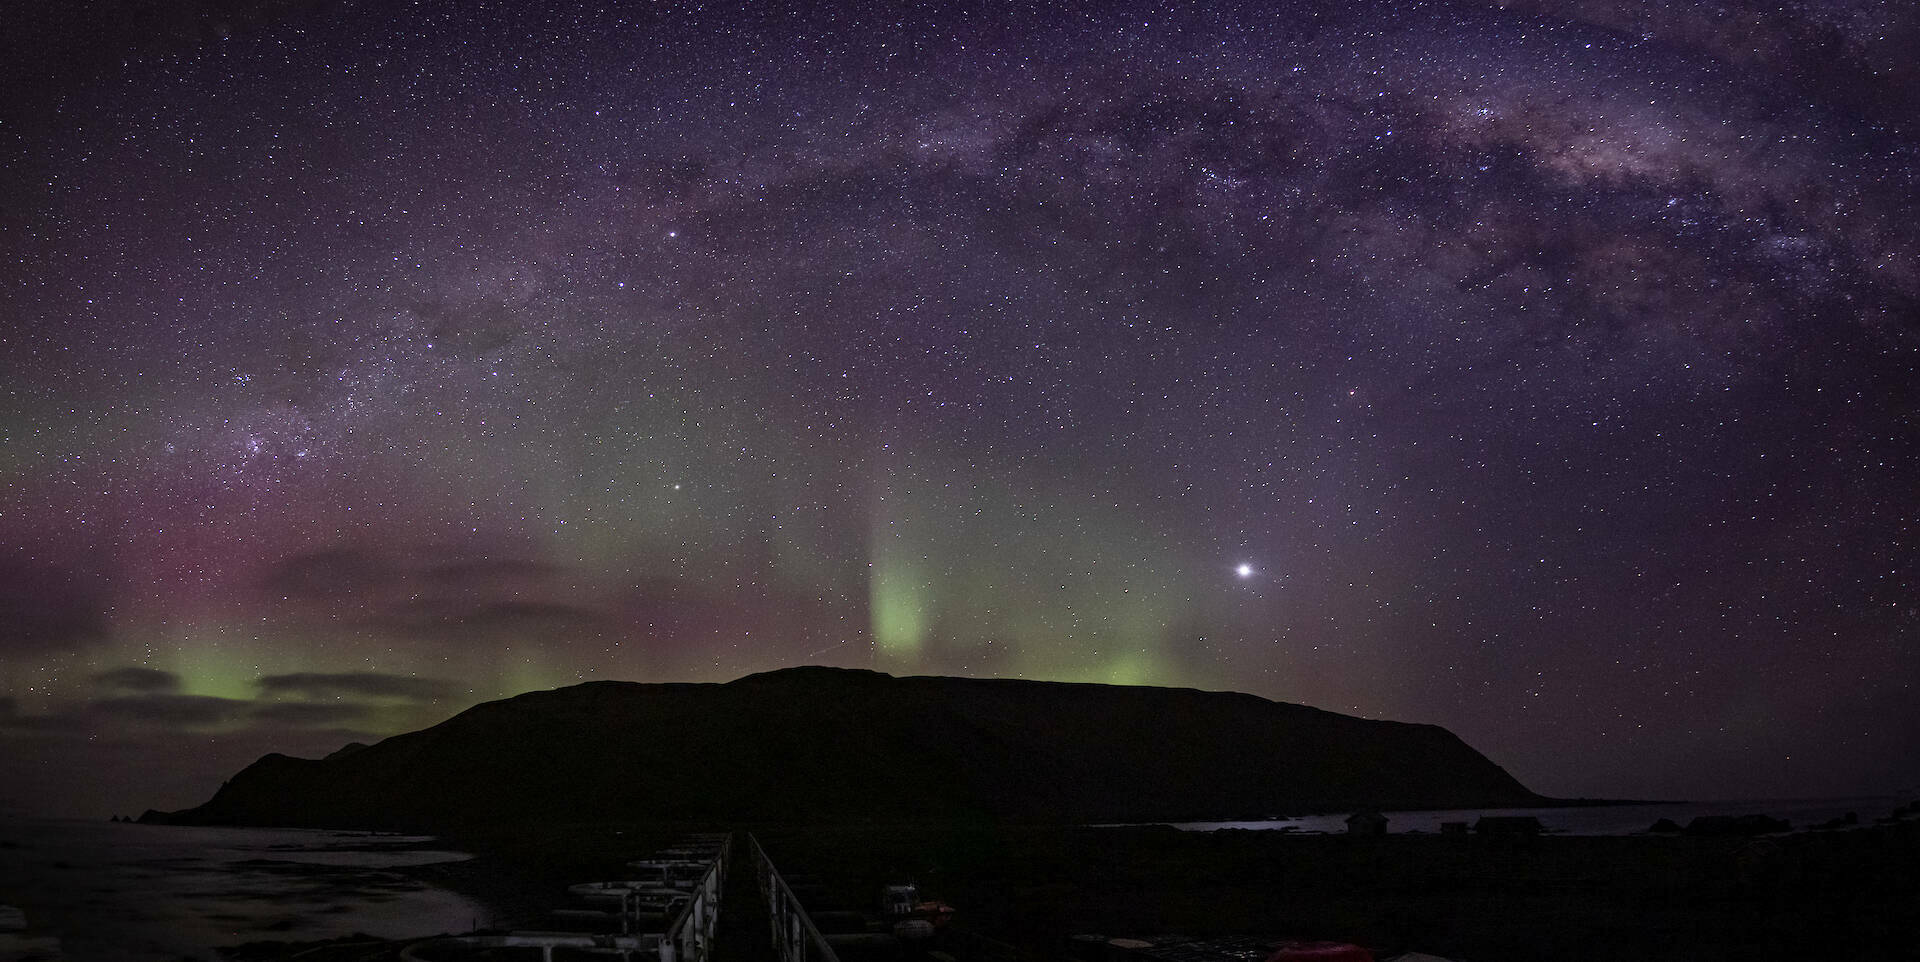 A faint green aurora lights up the sky over Macquarie Island, with the Milky Way visible.